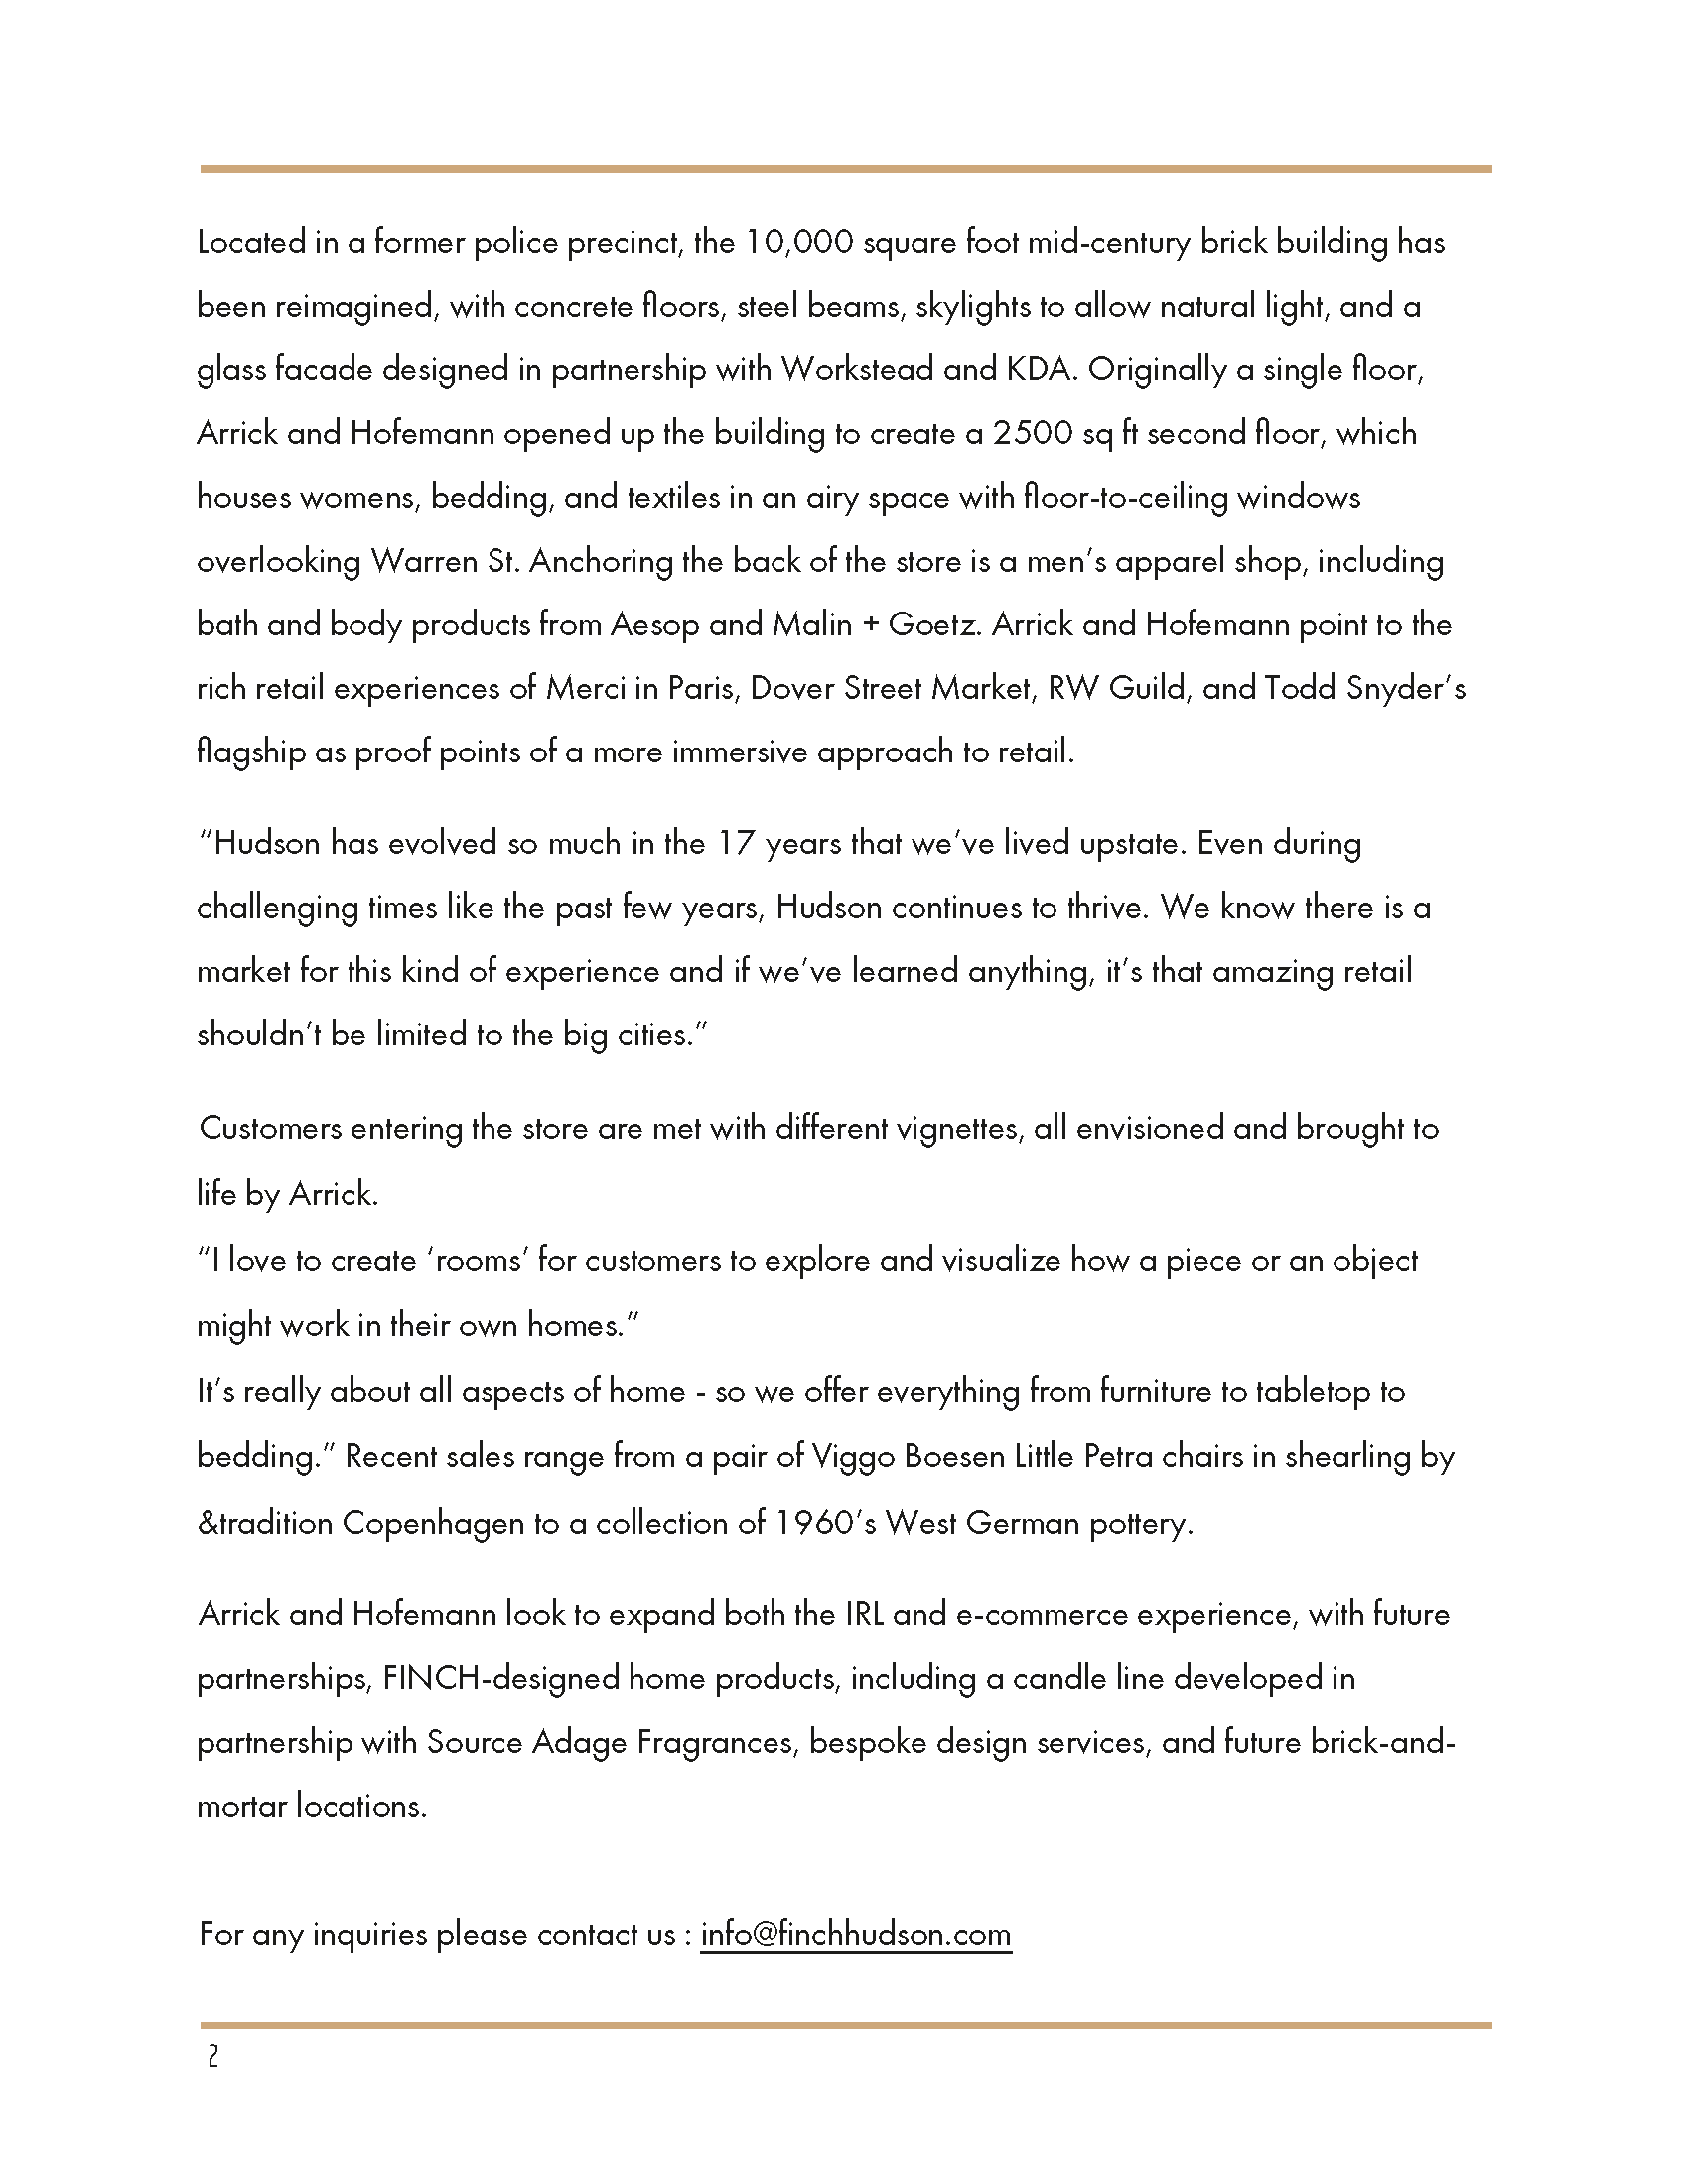 FINCH hudson 10th Anniversary Press Release - Page 2